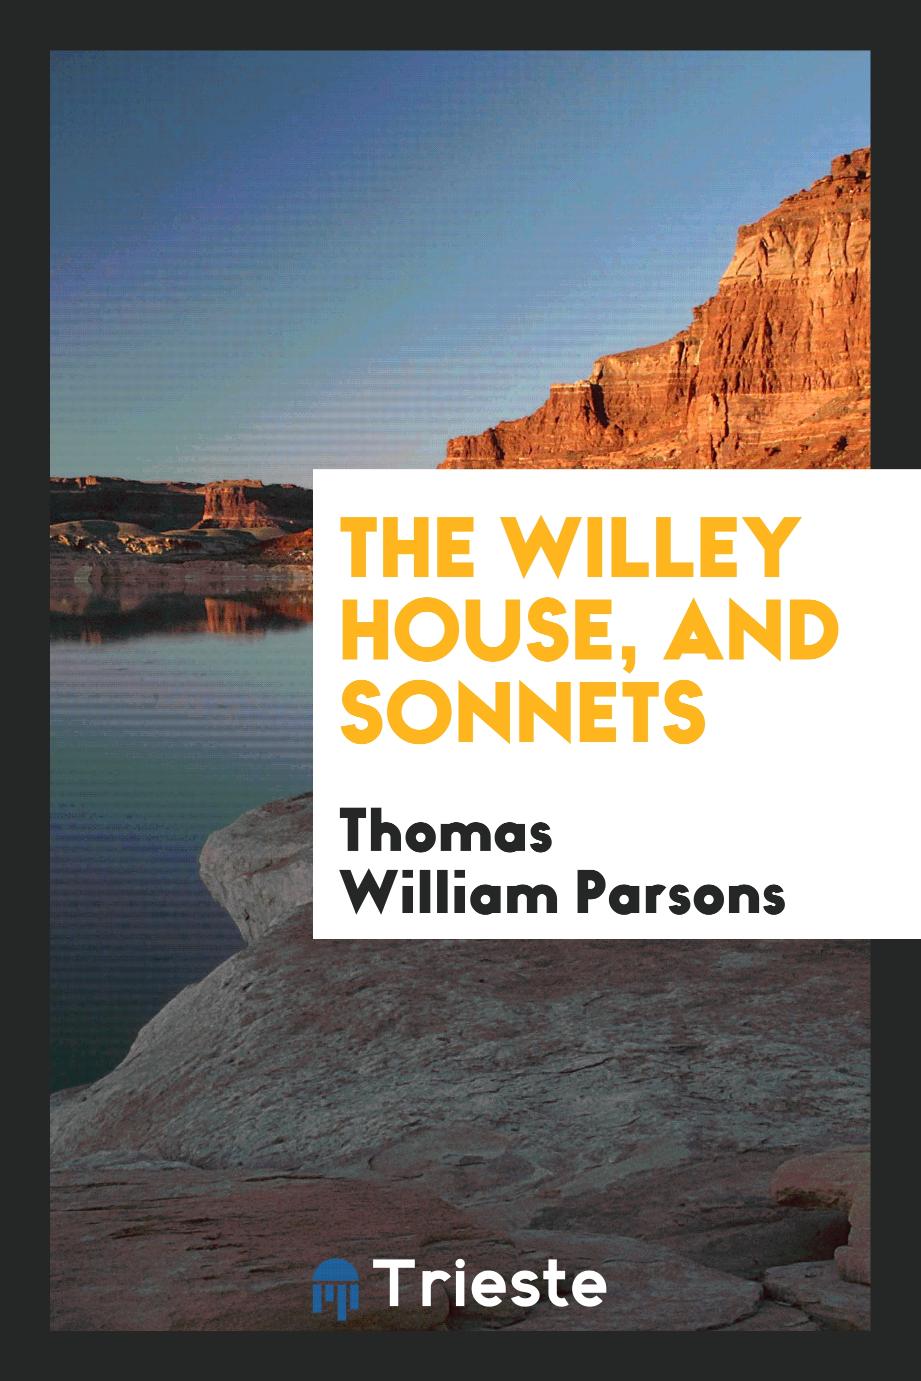 The Willey house, and sonnets